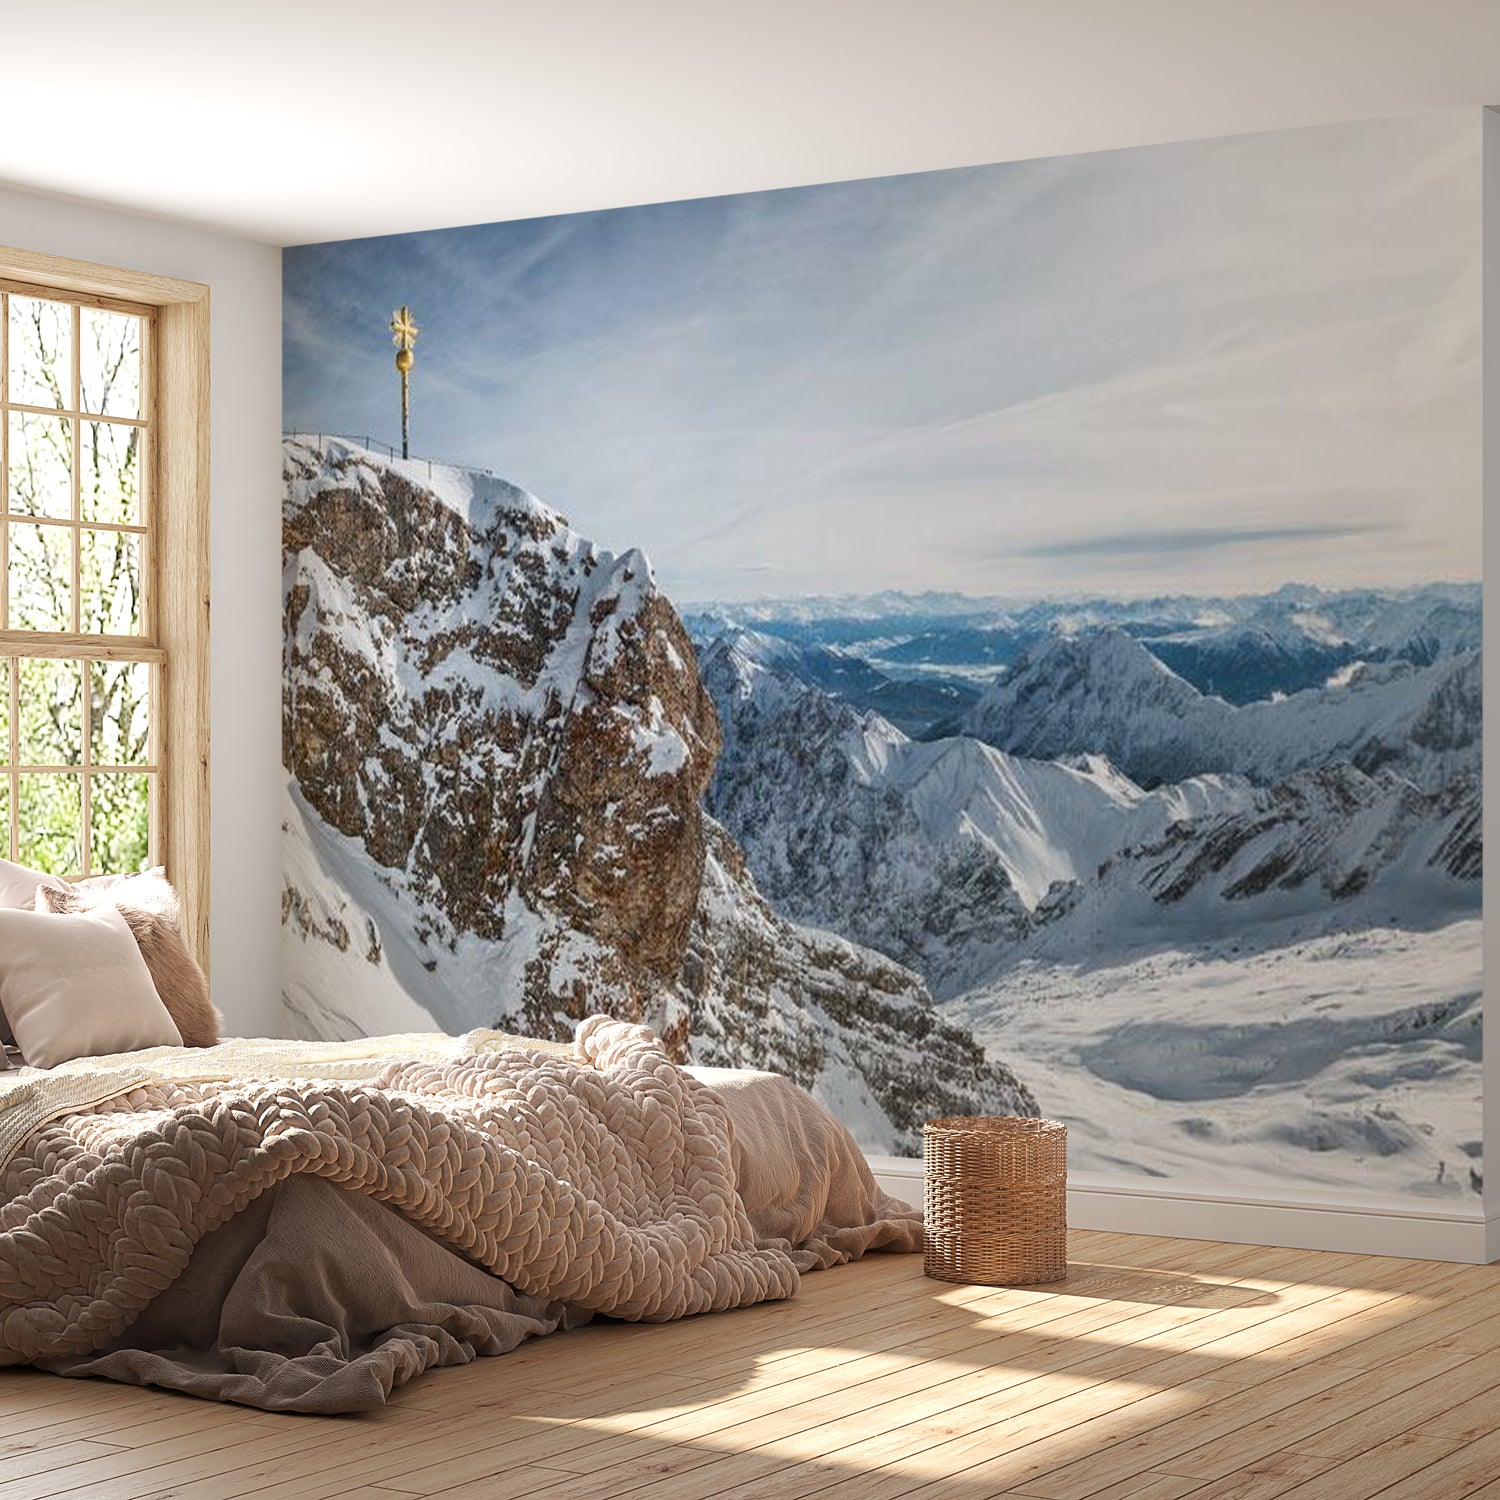 Peel & Stick Nature XXL Wall Mural - Winter In The Mountains - Removable Wall Decals